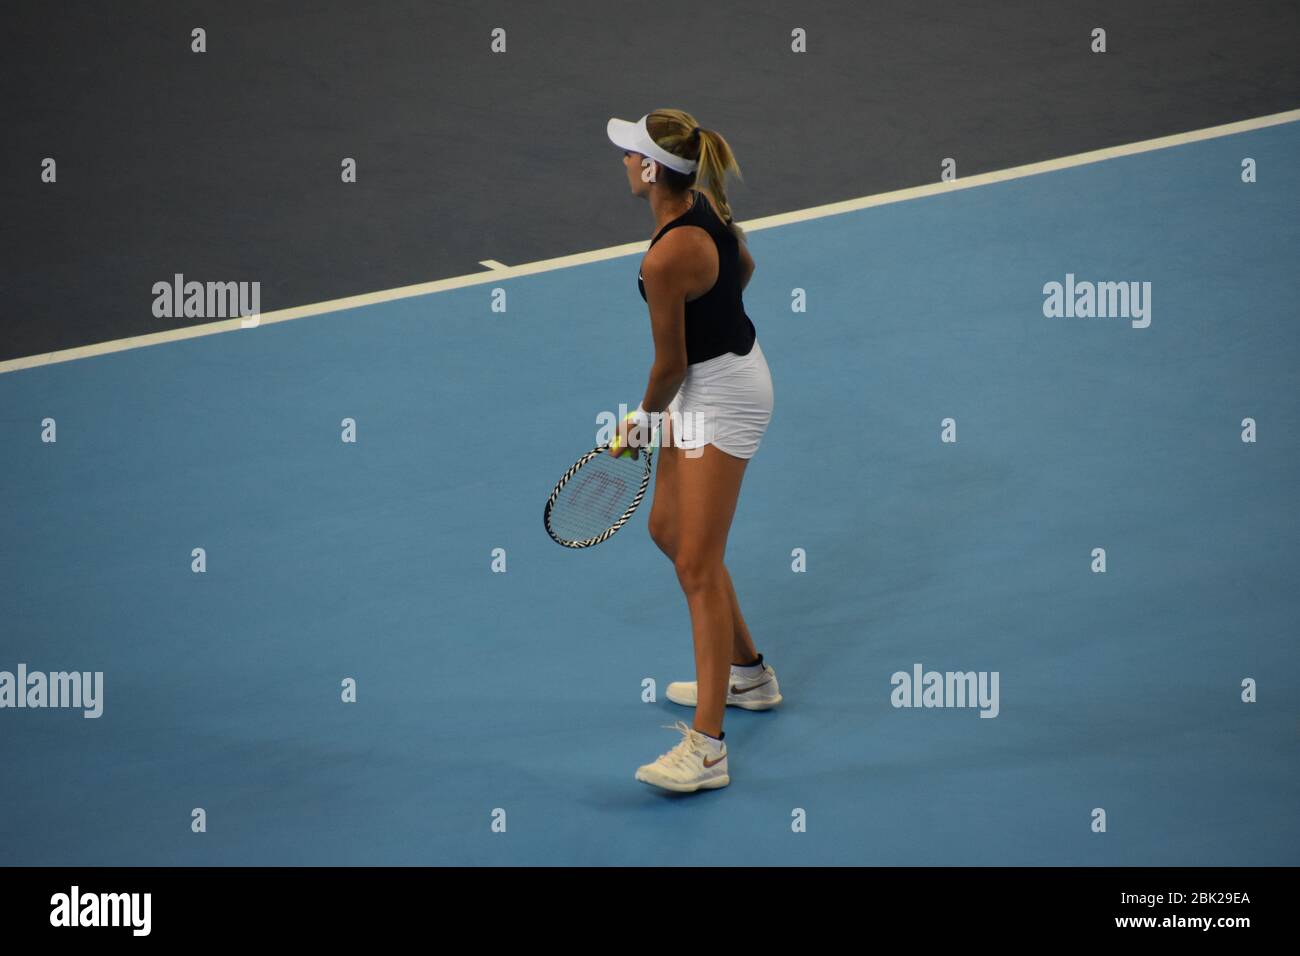 Katie Boulter of Great Britain at the Copper Box Arena, London on the 20th of April 2019 for the women’s tennis FED CUP (Team GB). Stock Photo